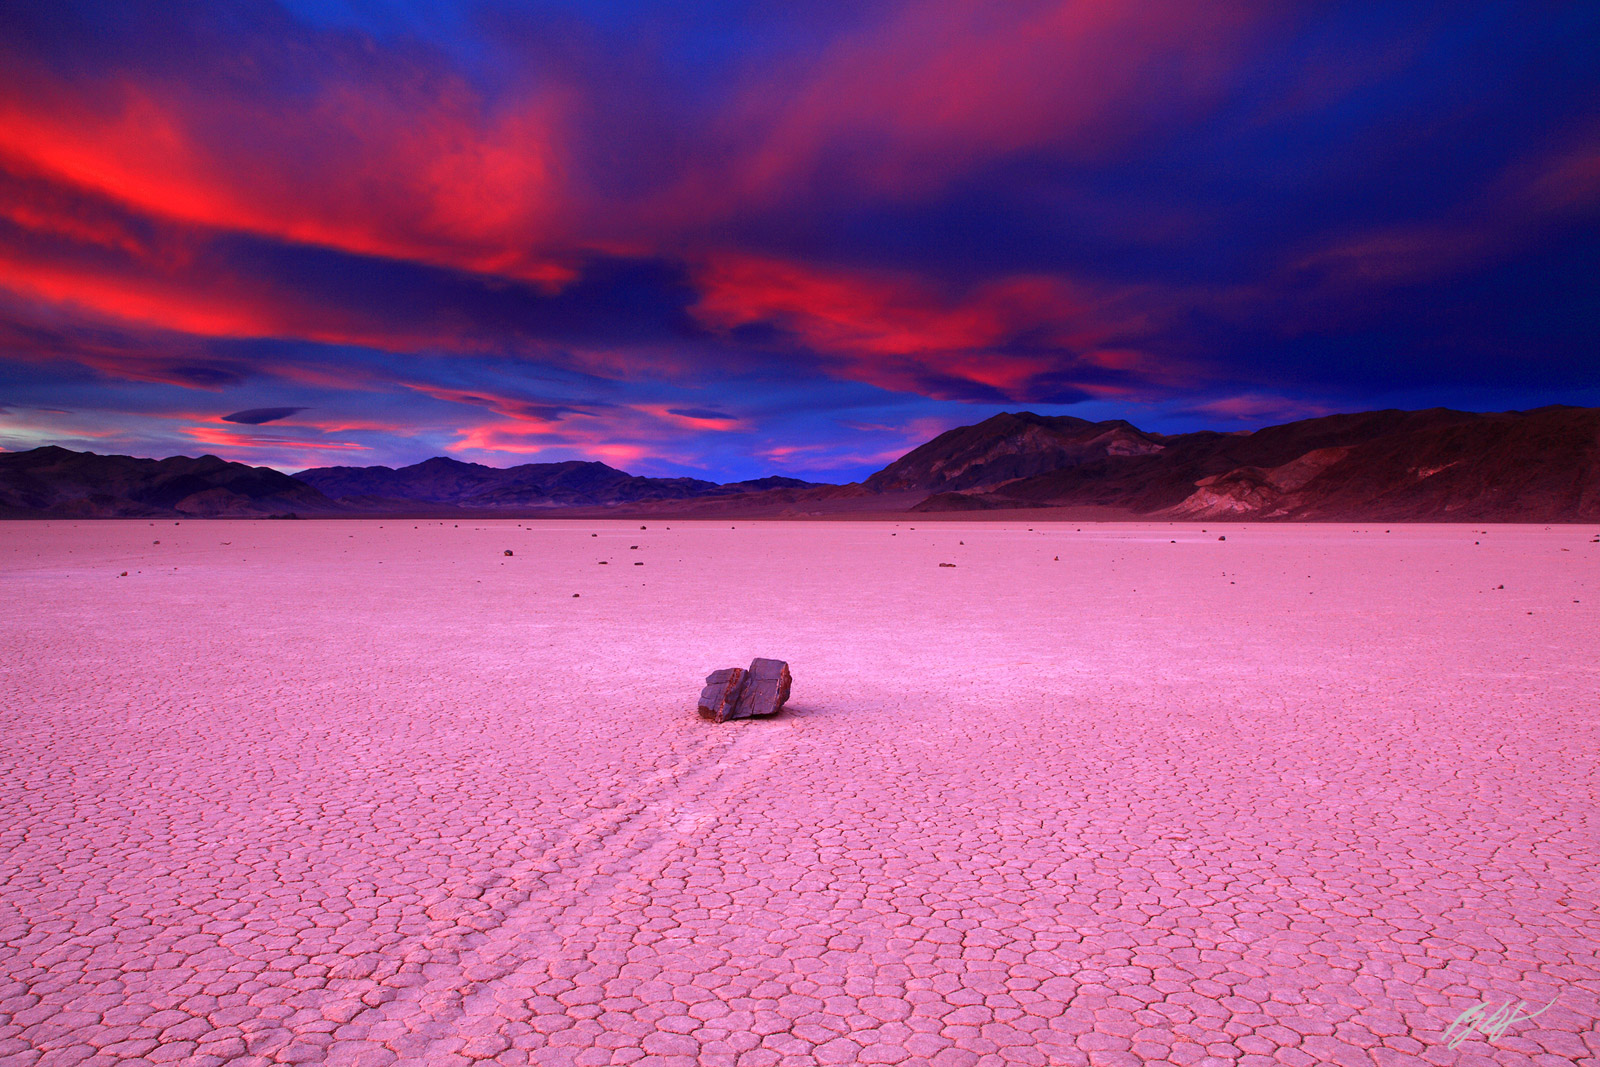 Sunset showing the Mysterious Movement of the Rocks on the Race Track in Death Valley National Park in California